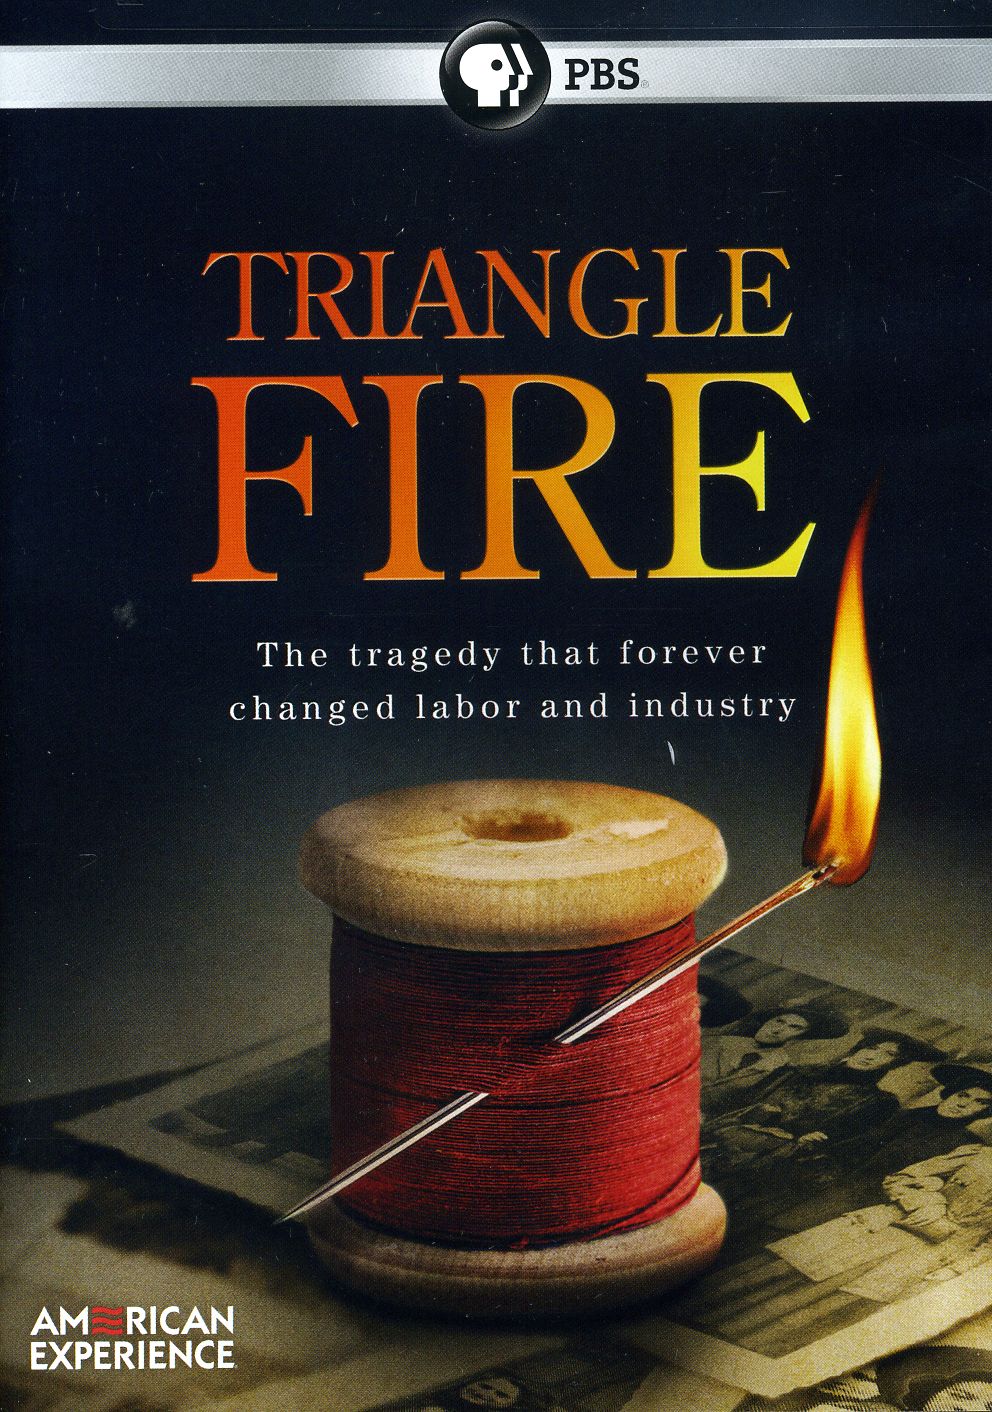 AMERICAN EXPERIENCE: TRIANGLE FIRE